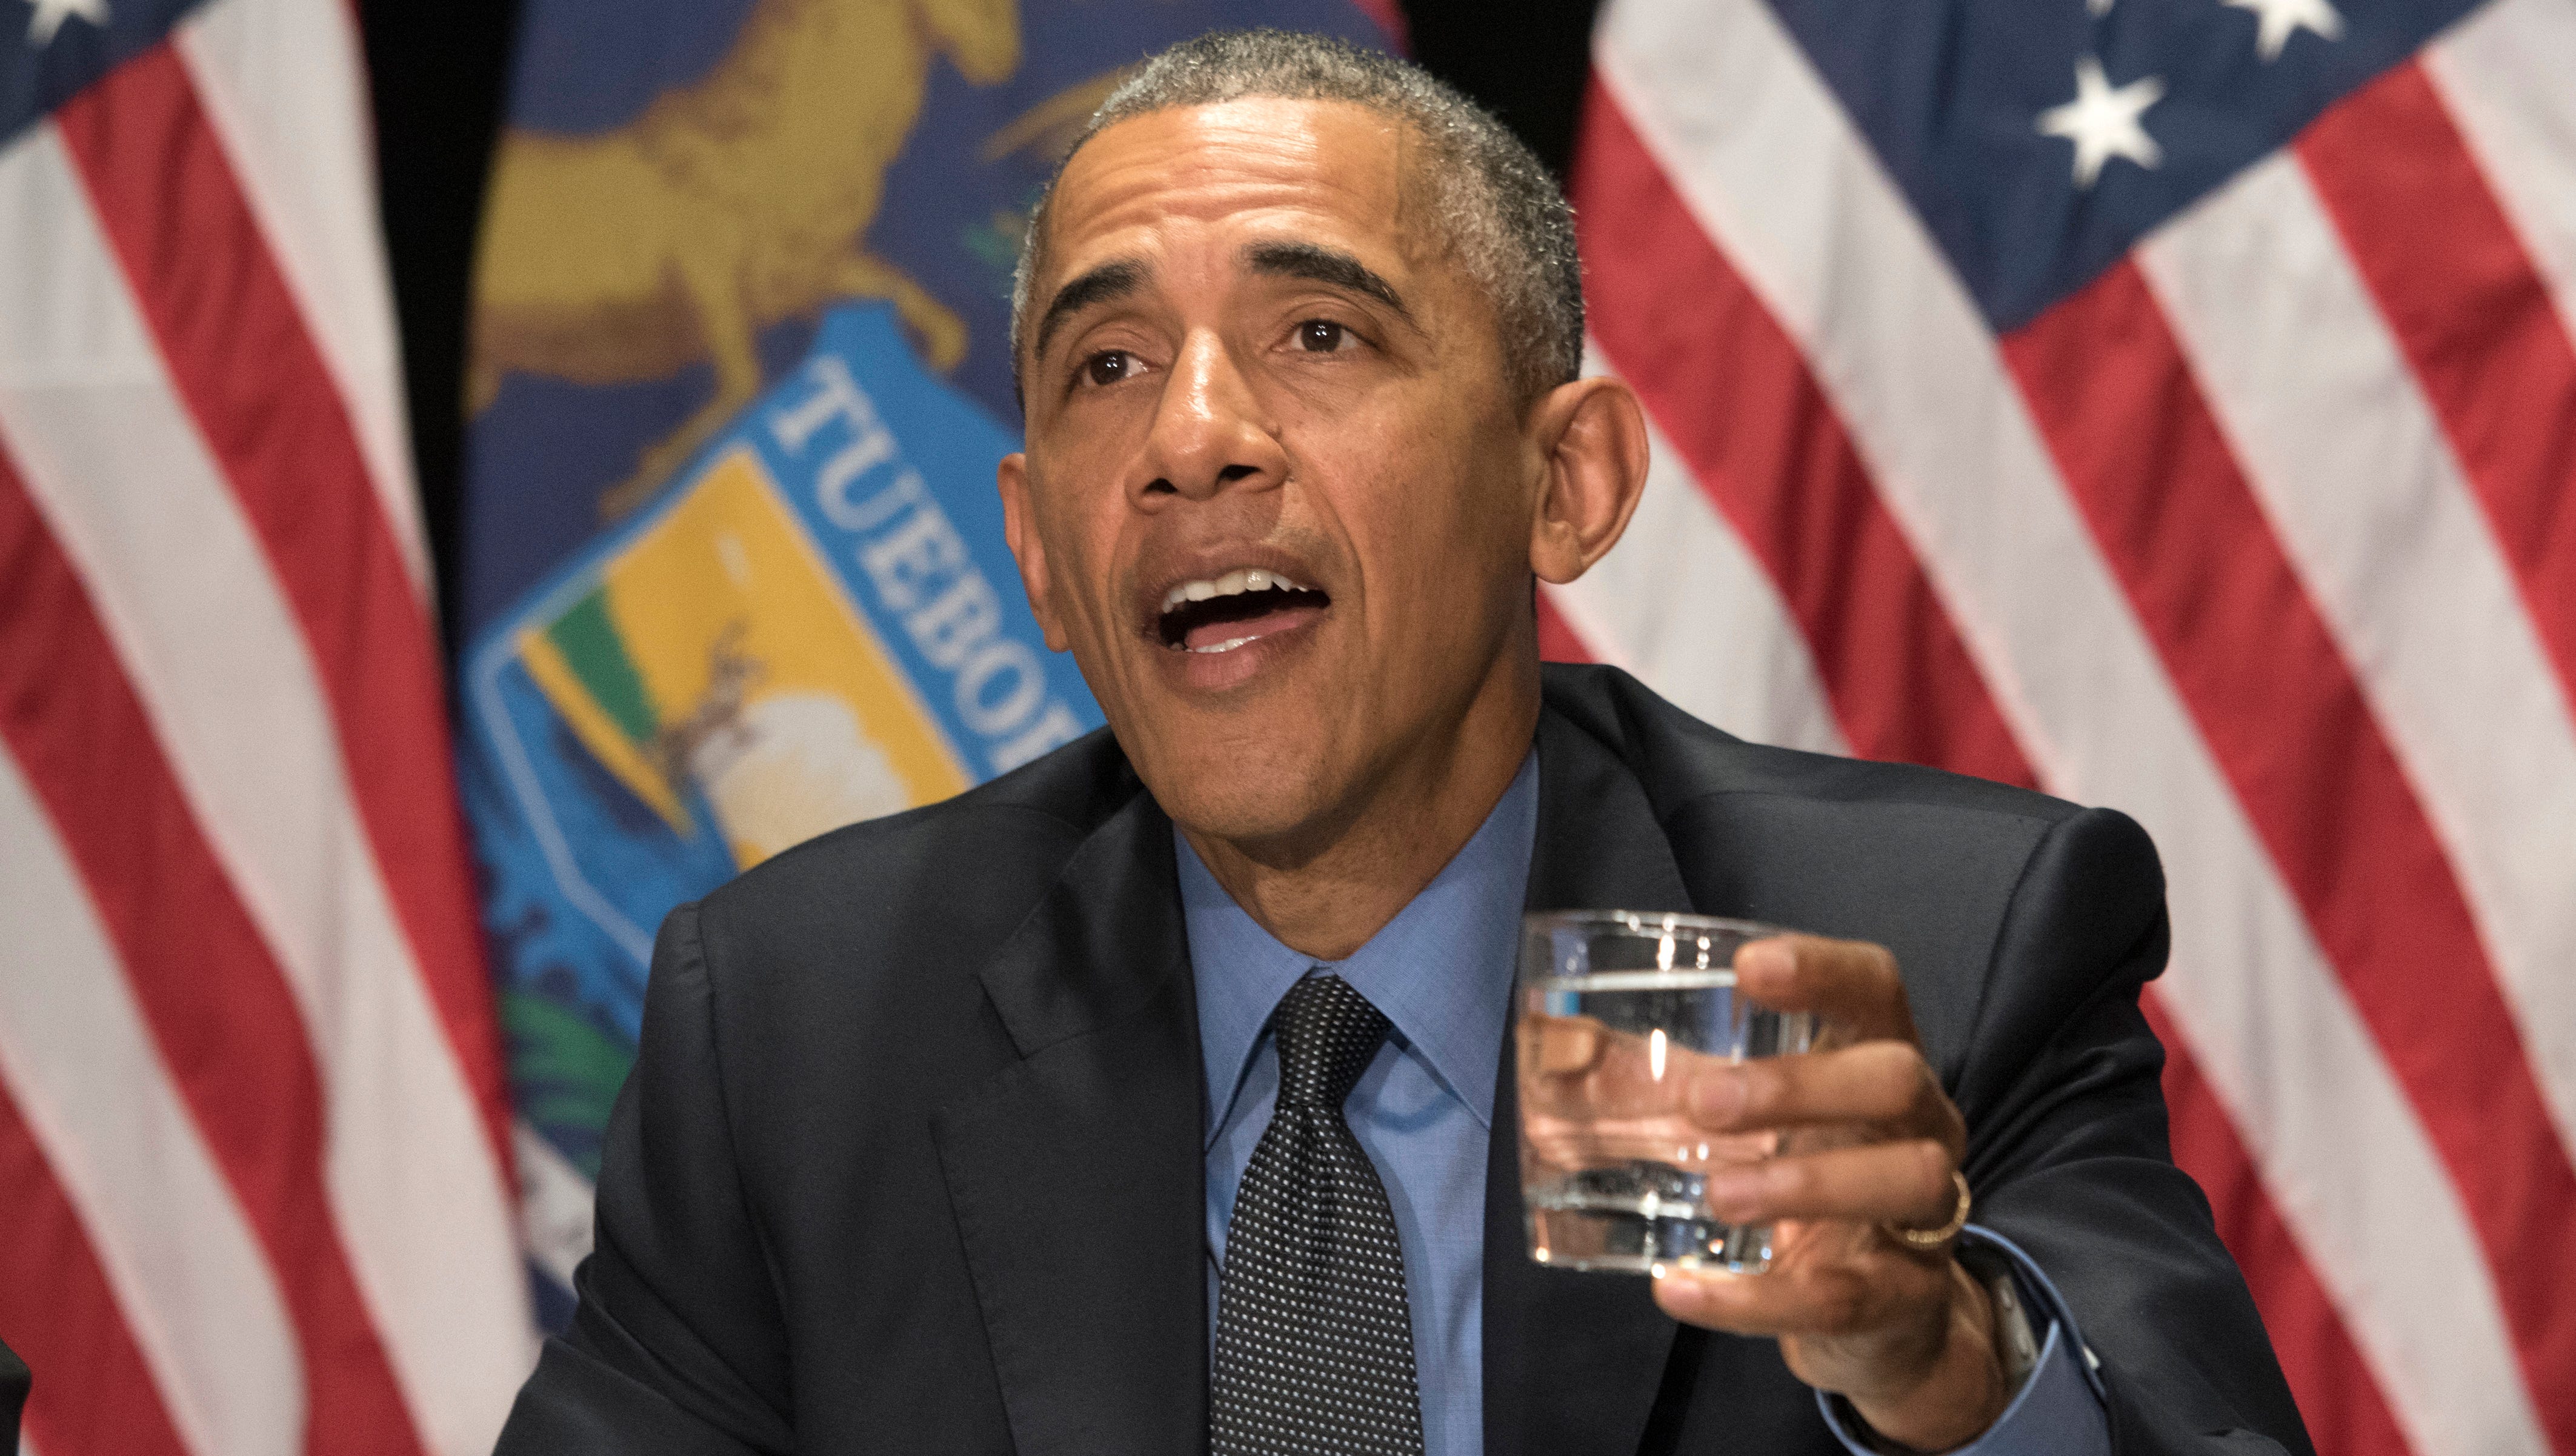 President Obama drinks a sip of filtered Flint water during a meeting with federal officials at the Food Bank of Eastern Michigan in Flint. "Generally, I haven't been doing stunts, but here you go," he said before drinking.